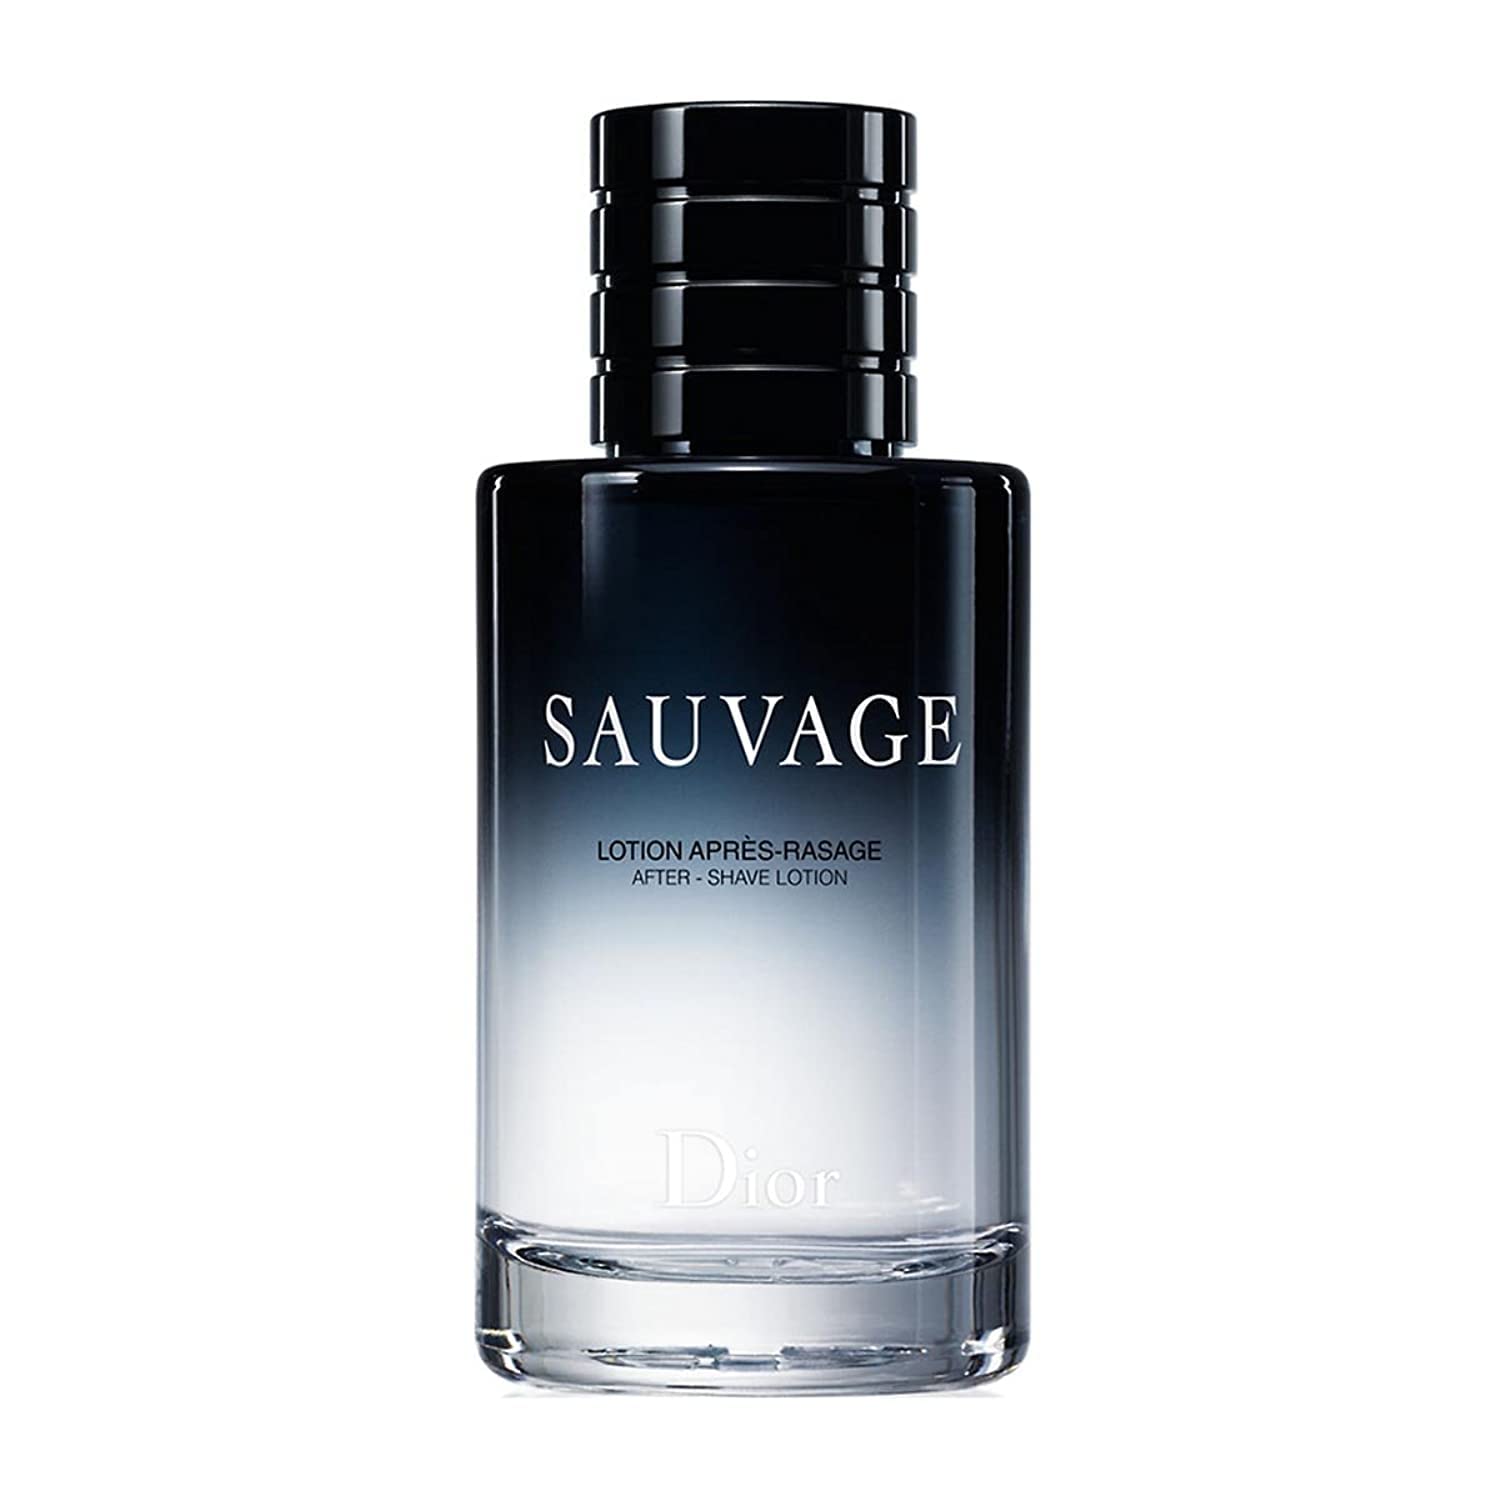 Dior Christian Dior Sauvage After-Shave Lotion, 3.4 Fluid Ounce